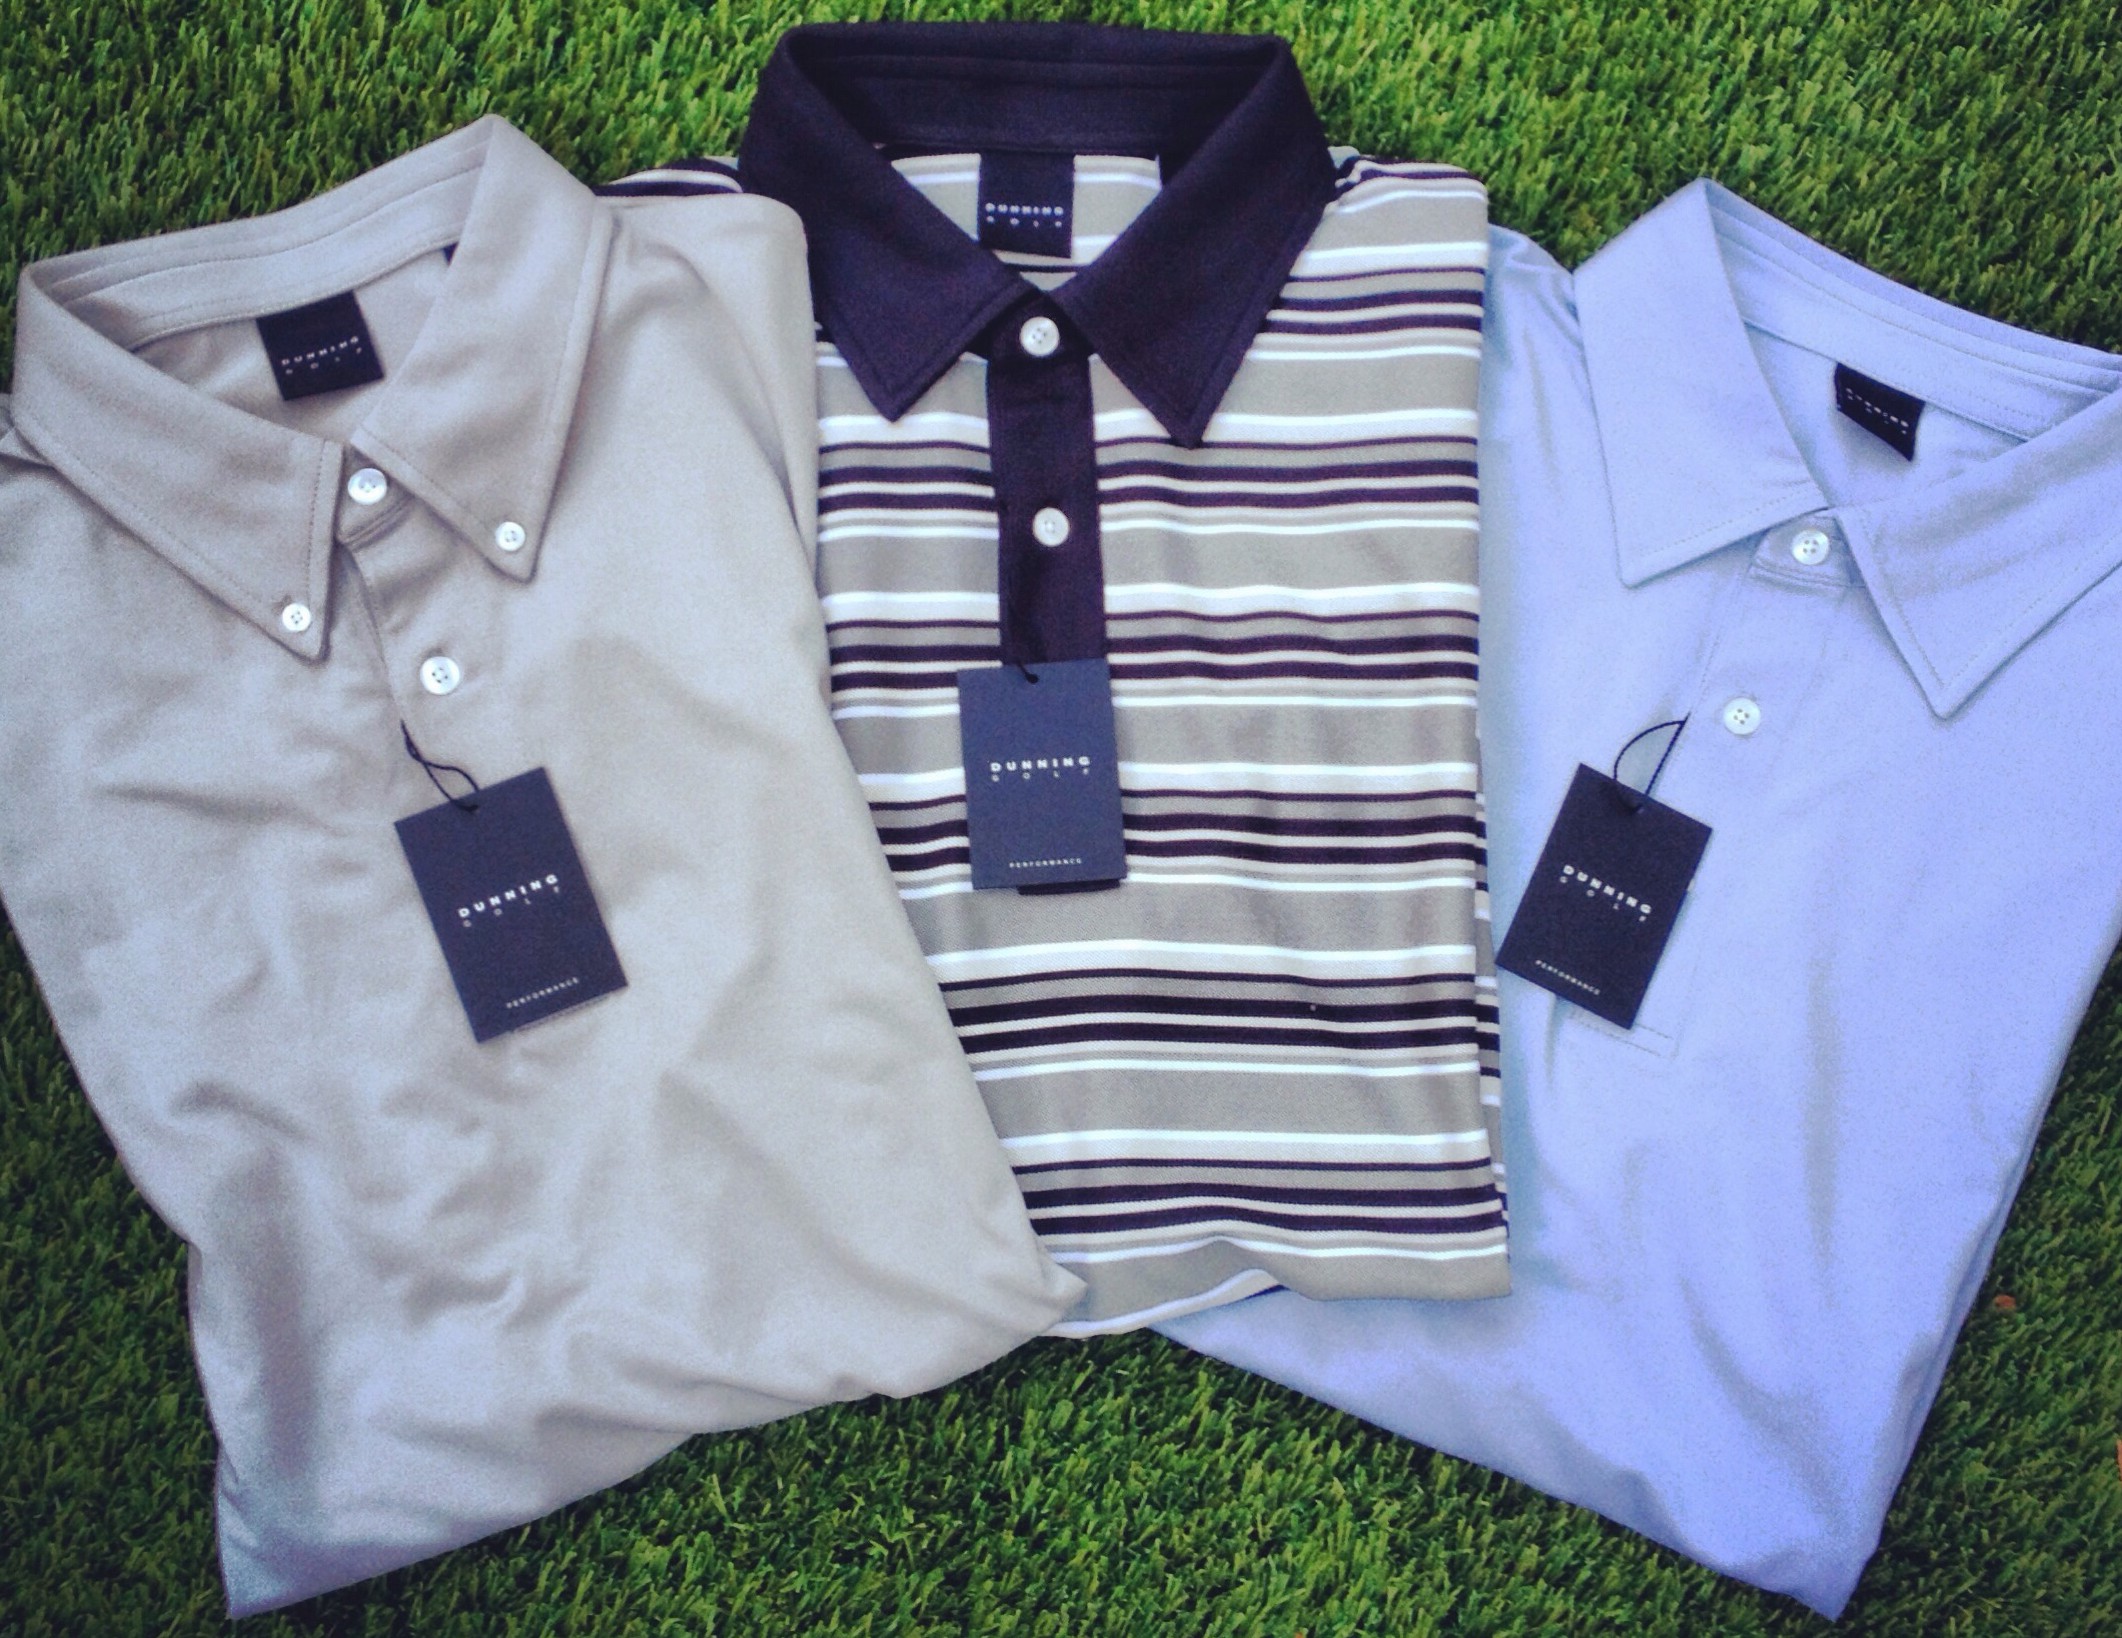 Dunning Golf: Stylish Players Wanted - GolfThreads